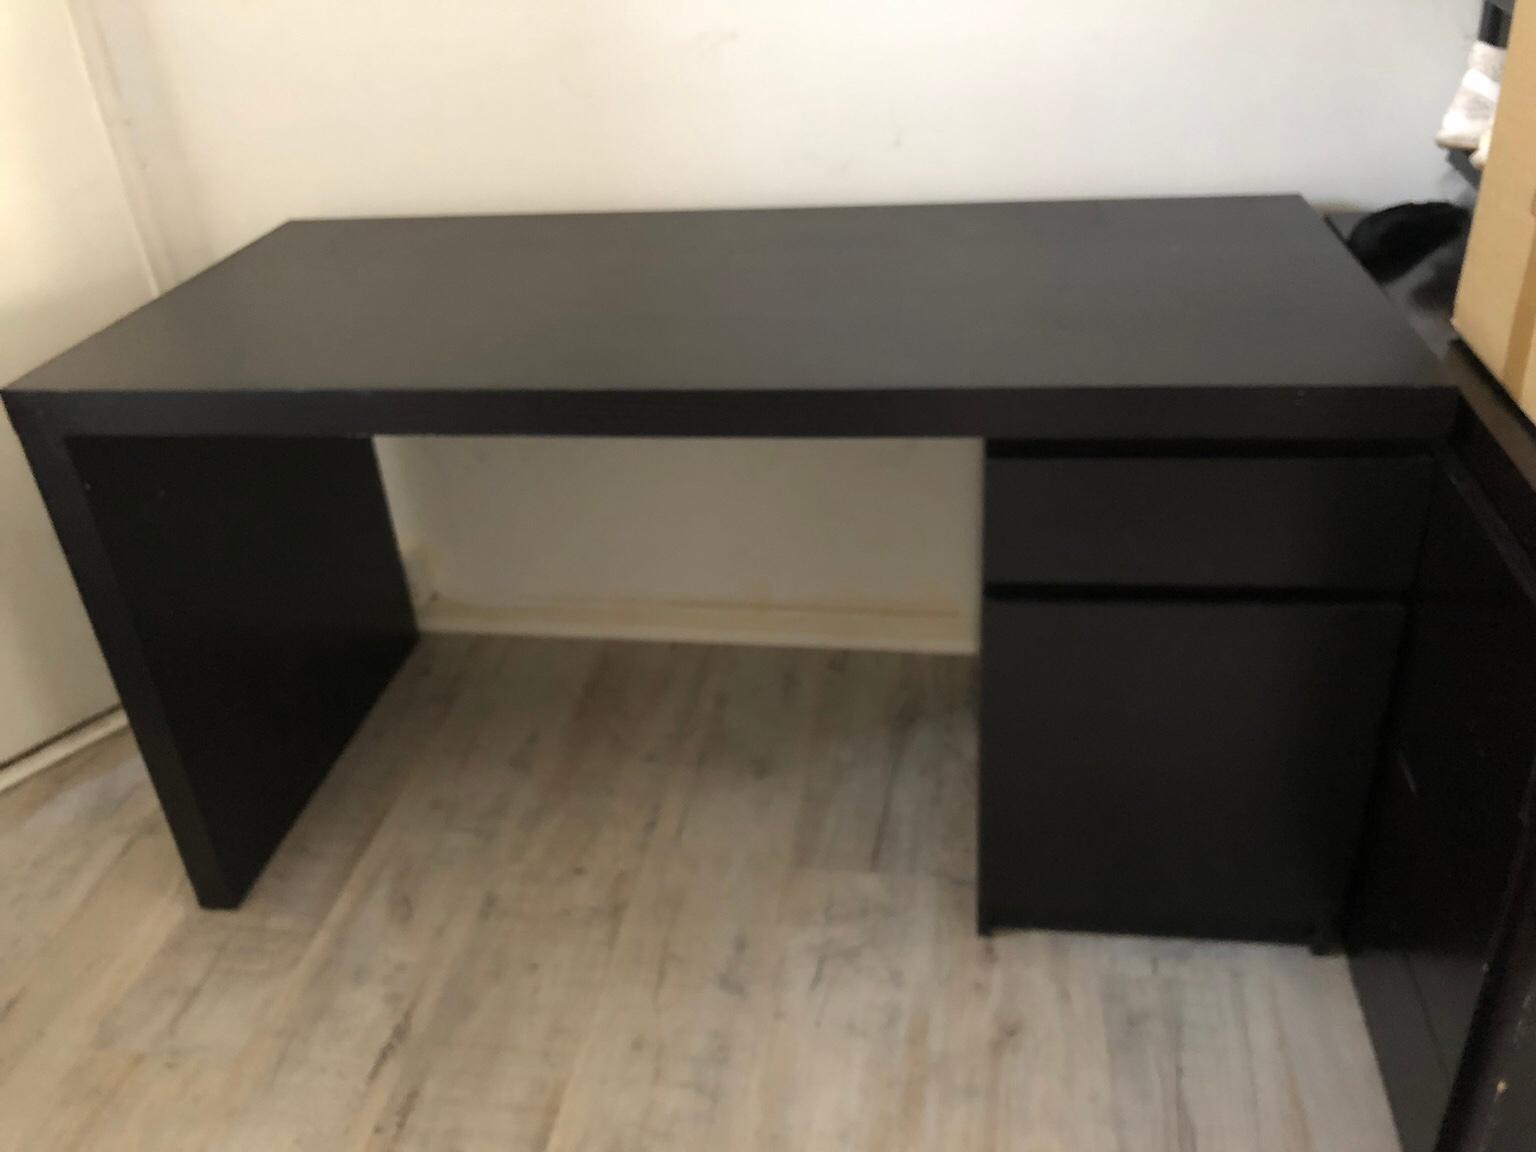 Ikea Malm Black Brown Desk In Sw15 Wandsworth For 35 00 For Sale